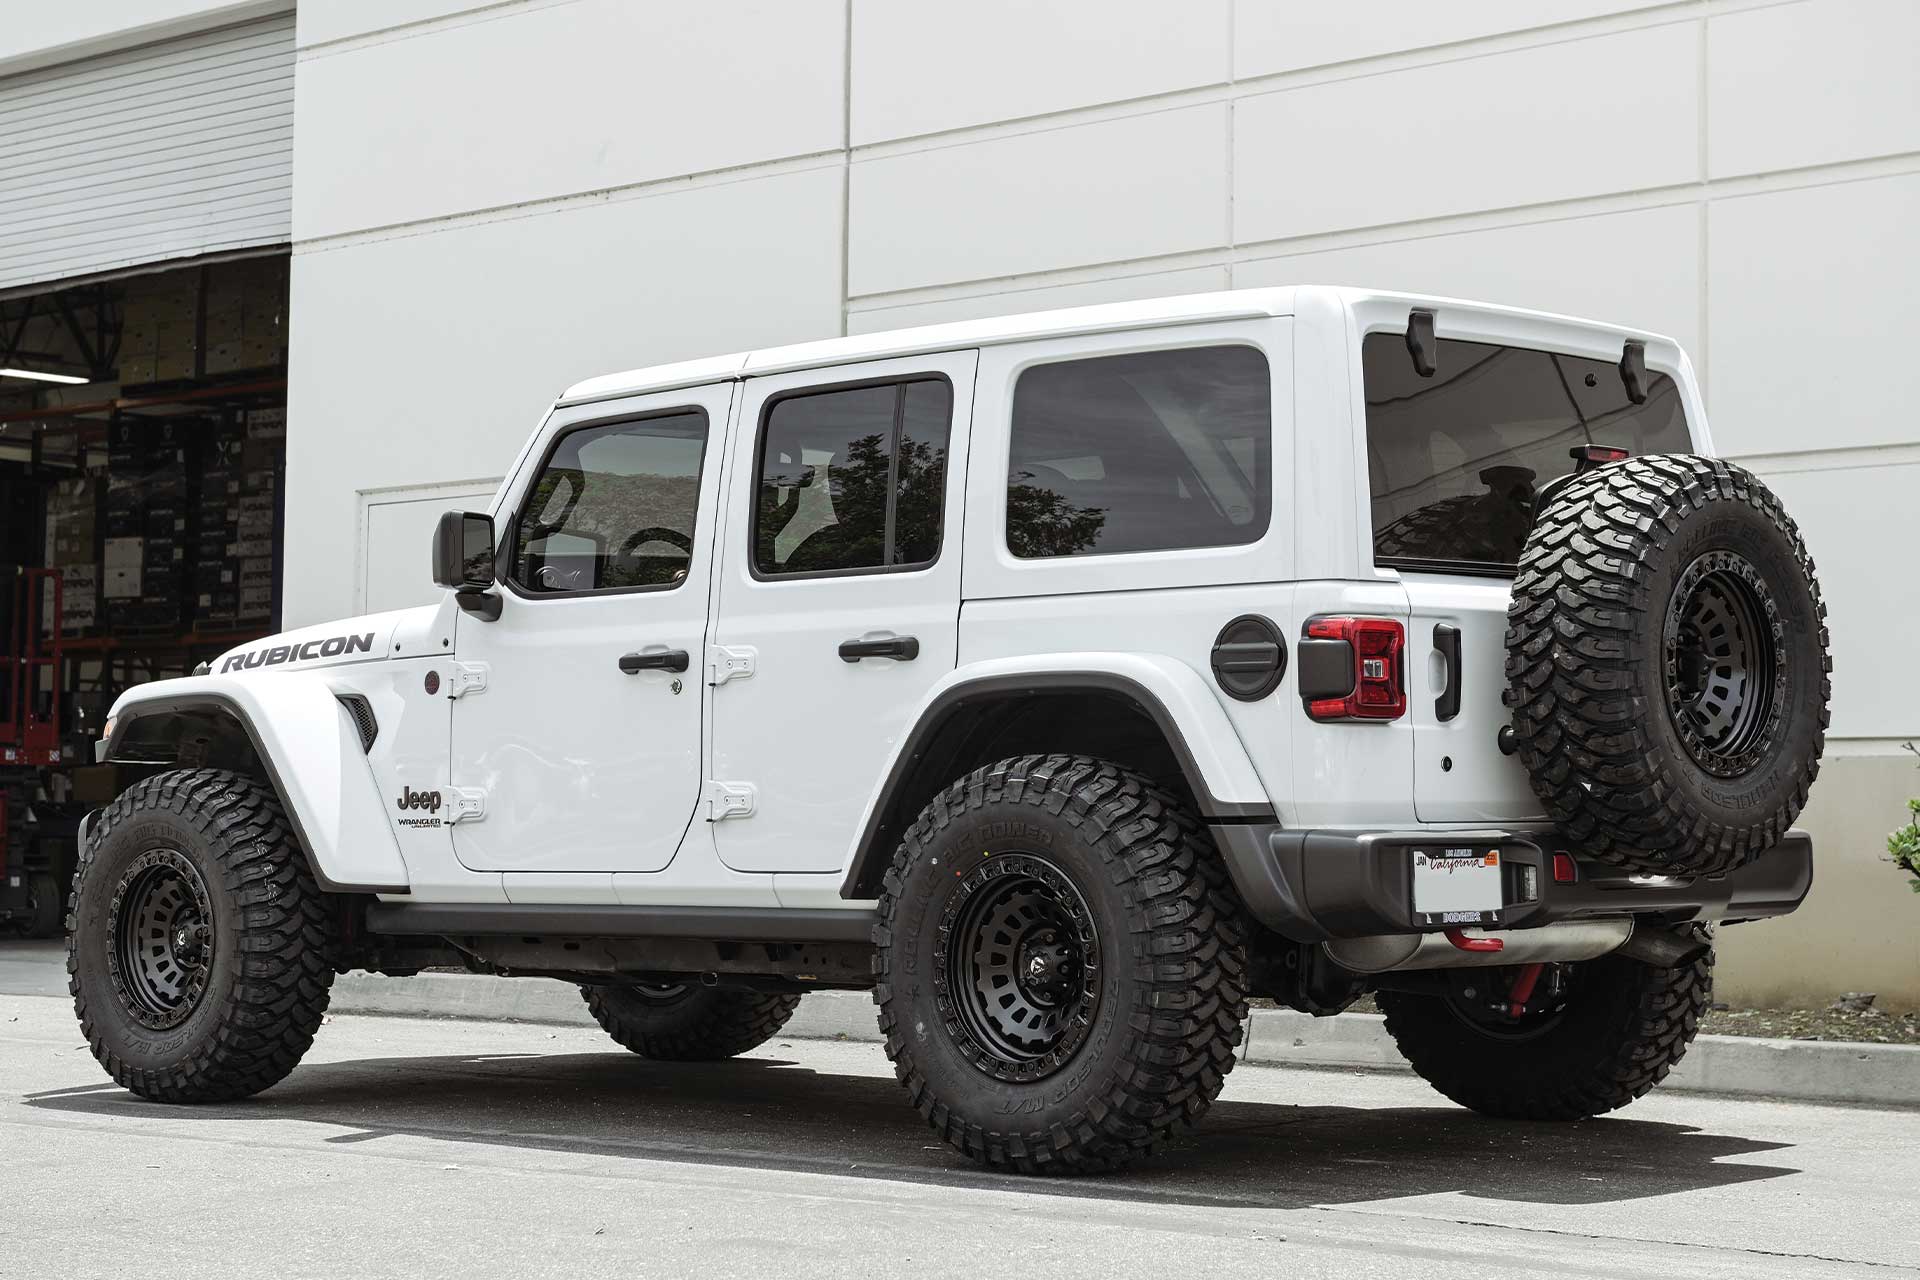 An image of a white Jeep Wrangler Rubicon on RBP Repulsor M/T tires